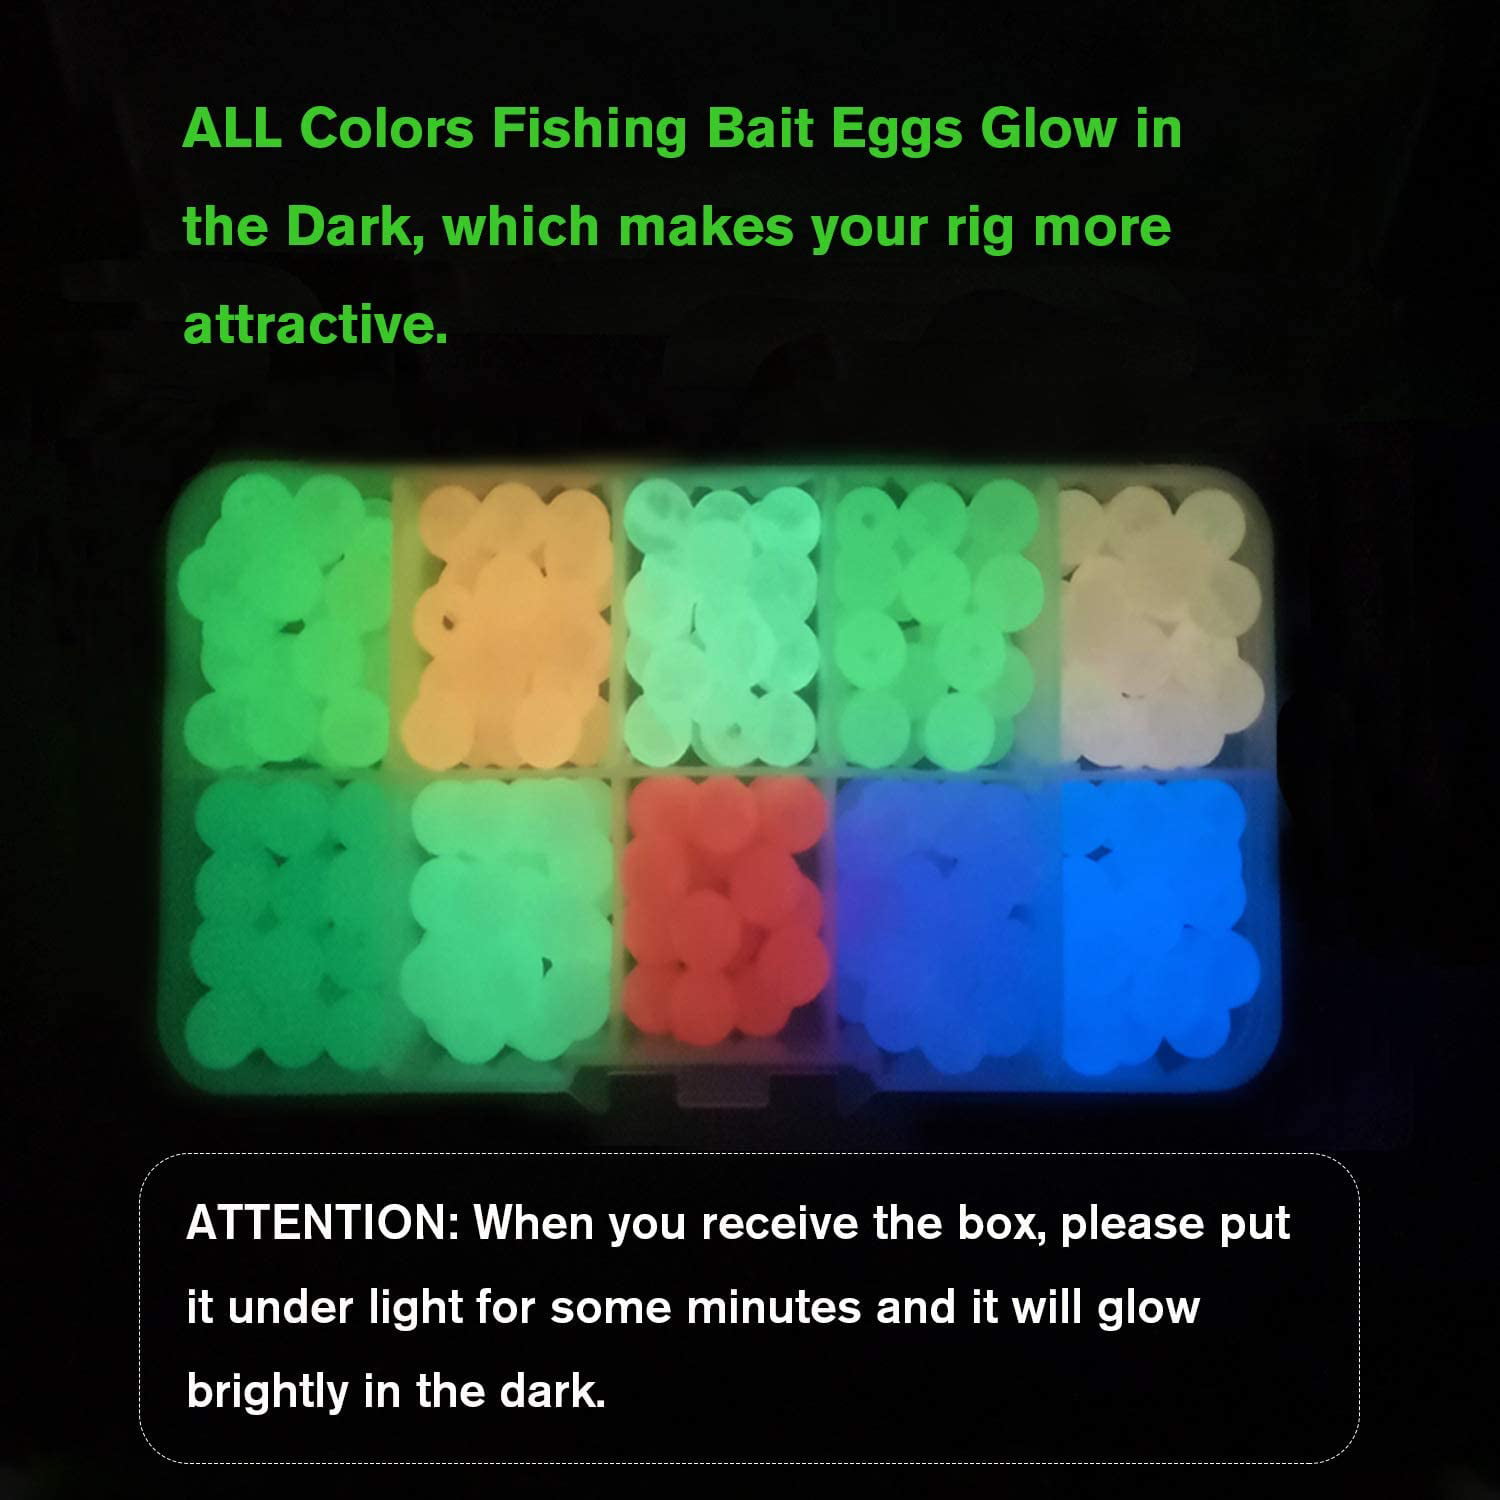 0.24in 250pcs 0.32in 0.39in Dovesun Fishing Beads Assorted Beads Fishing Bait Eggs 10 Colors Glow in Dark/Laser/Colorful 0.2in 600pcs 120pcs 1000pcs 